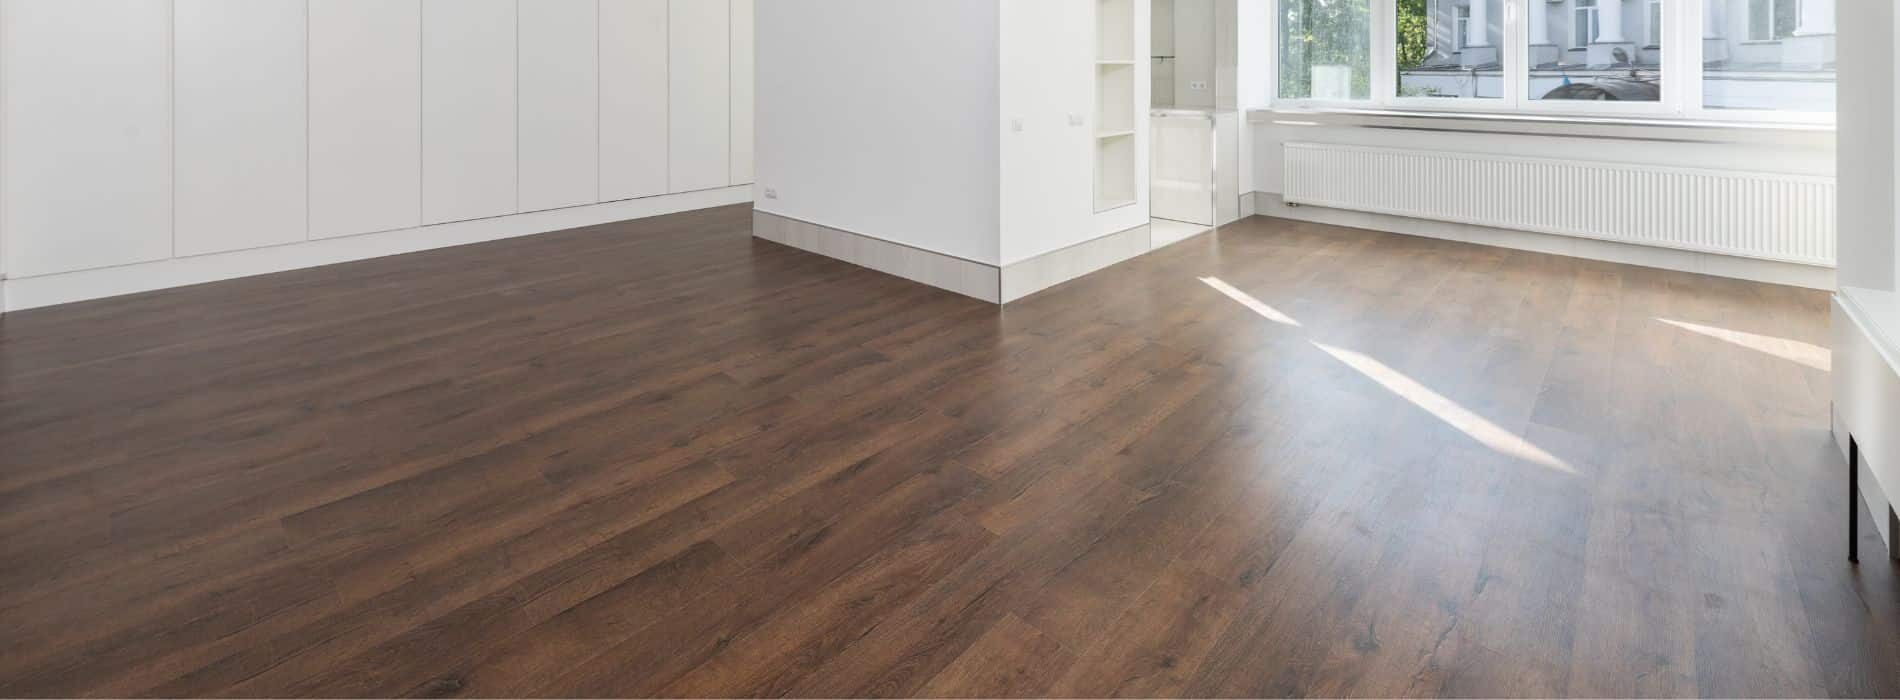 Expertly restored 5-year-old hardwood floor in Worcester Park, KT4. Bona 2.5K Frost whitewashing and Traffic HD 16% sheen matte lacquer were used by Mr Sander®. Durable and stunning, this finish ensures long-lasting beauty.